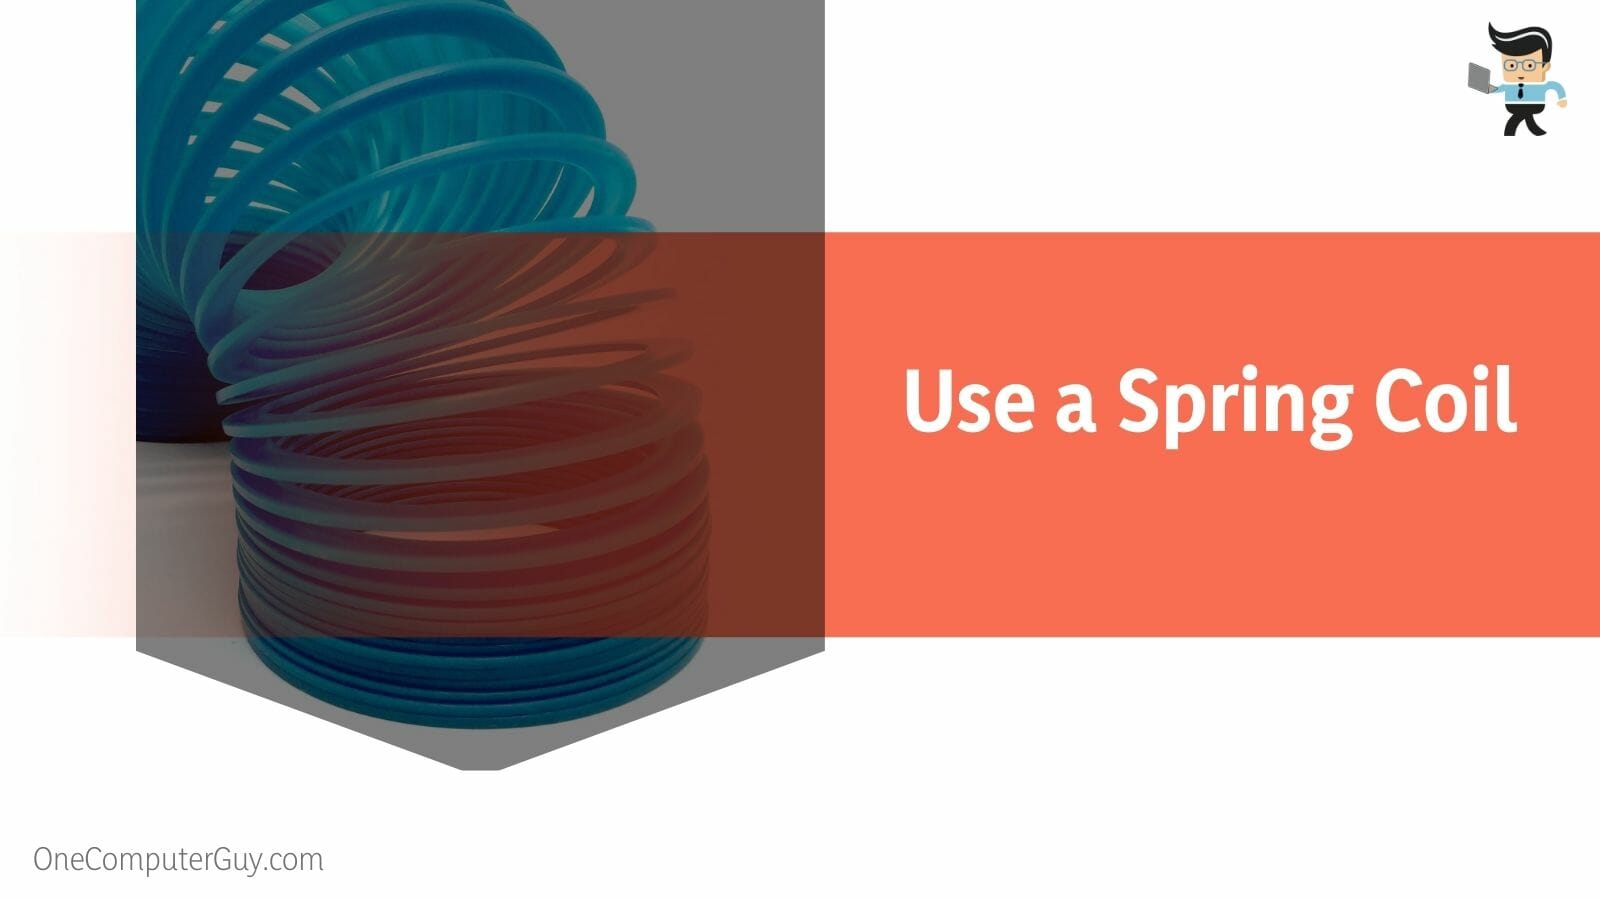 Use a Spring Coil